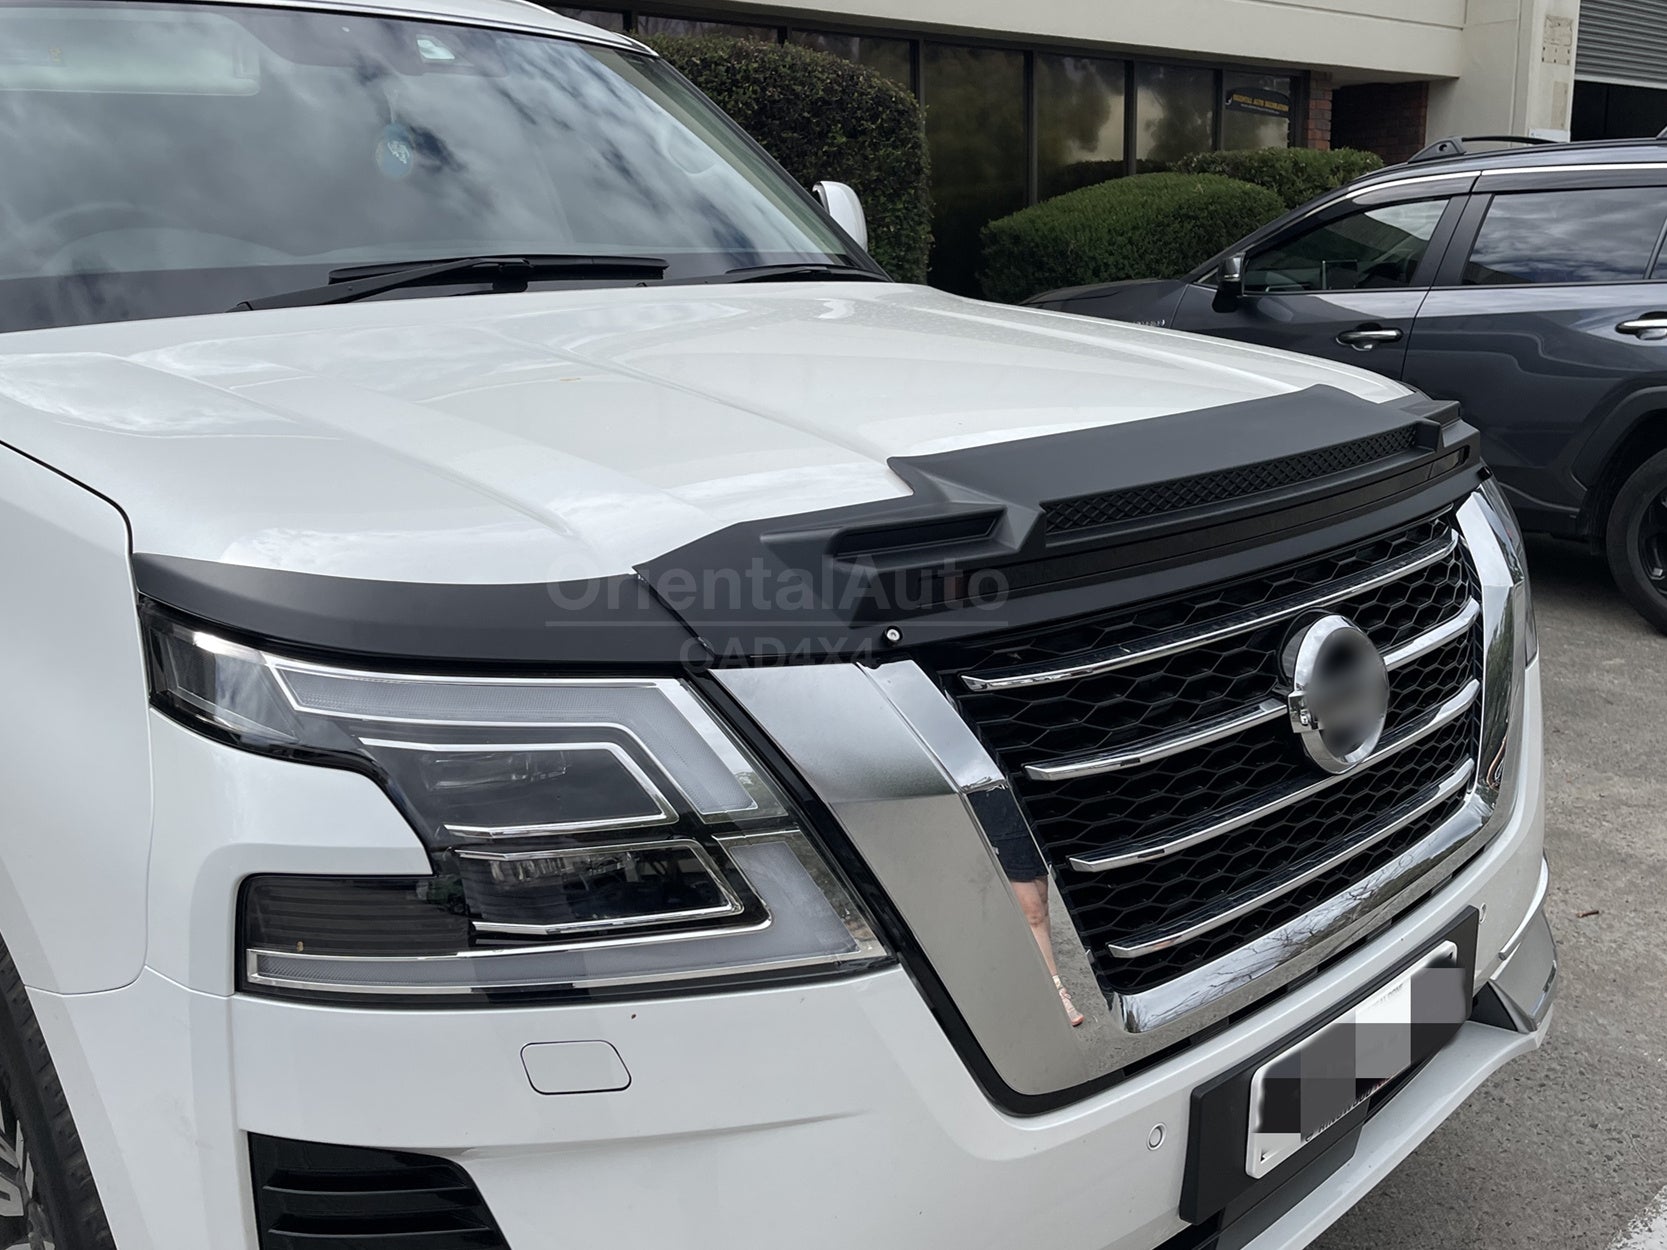 Injection Modeling Exclusive Bonnet Protector for Nissan Patrol